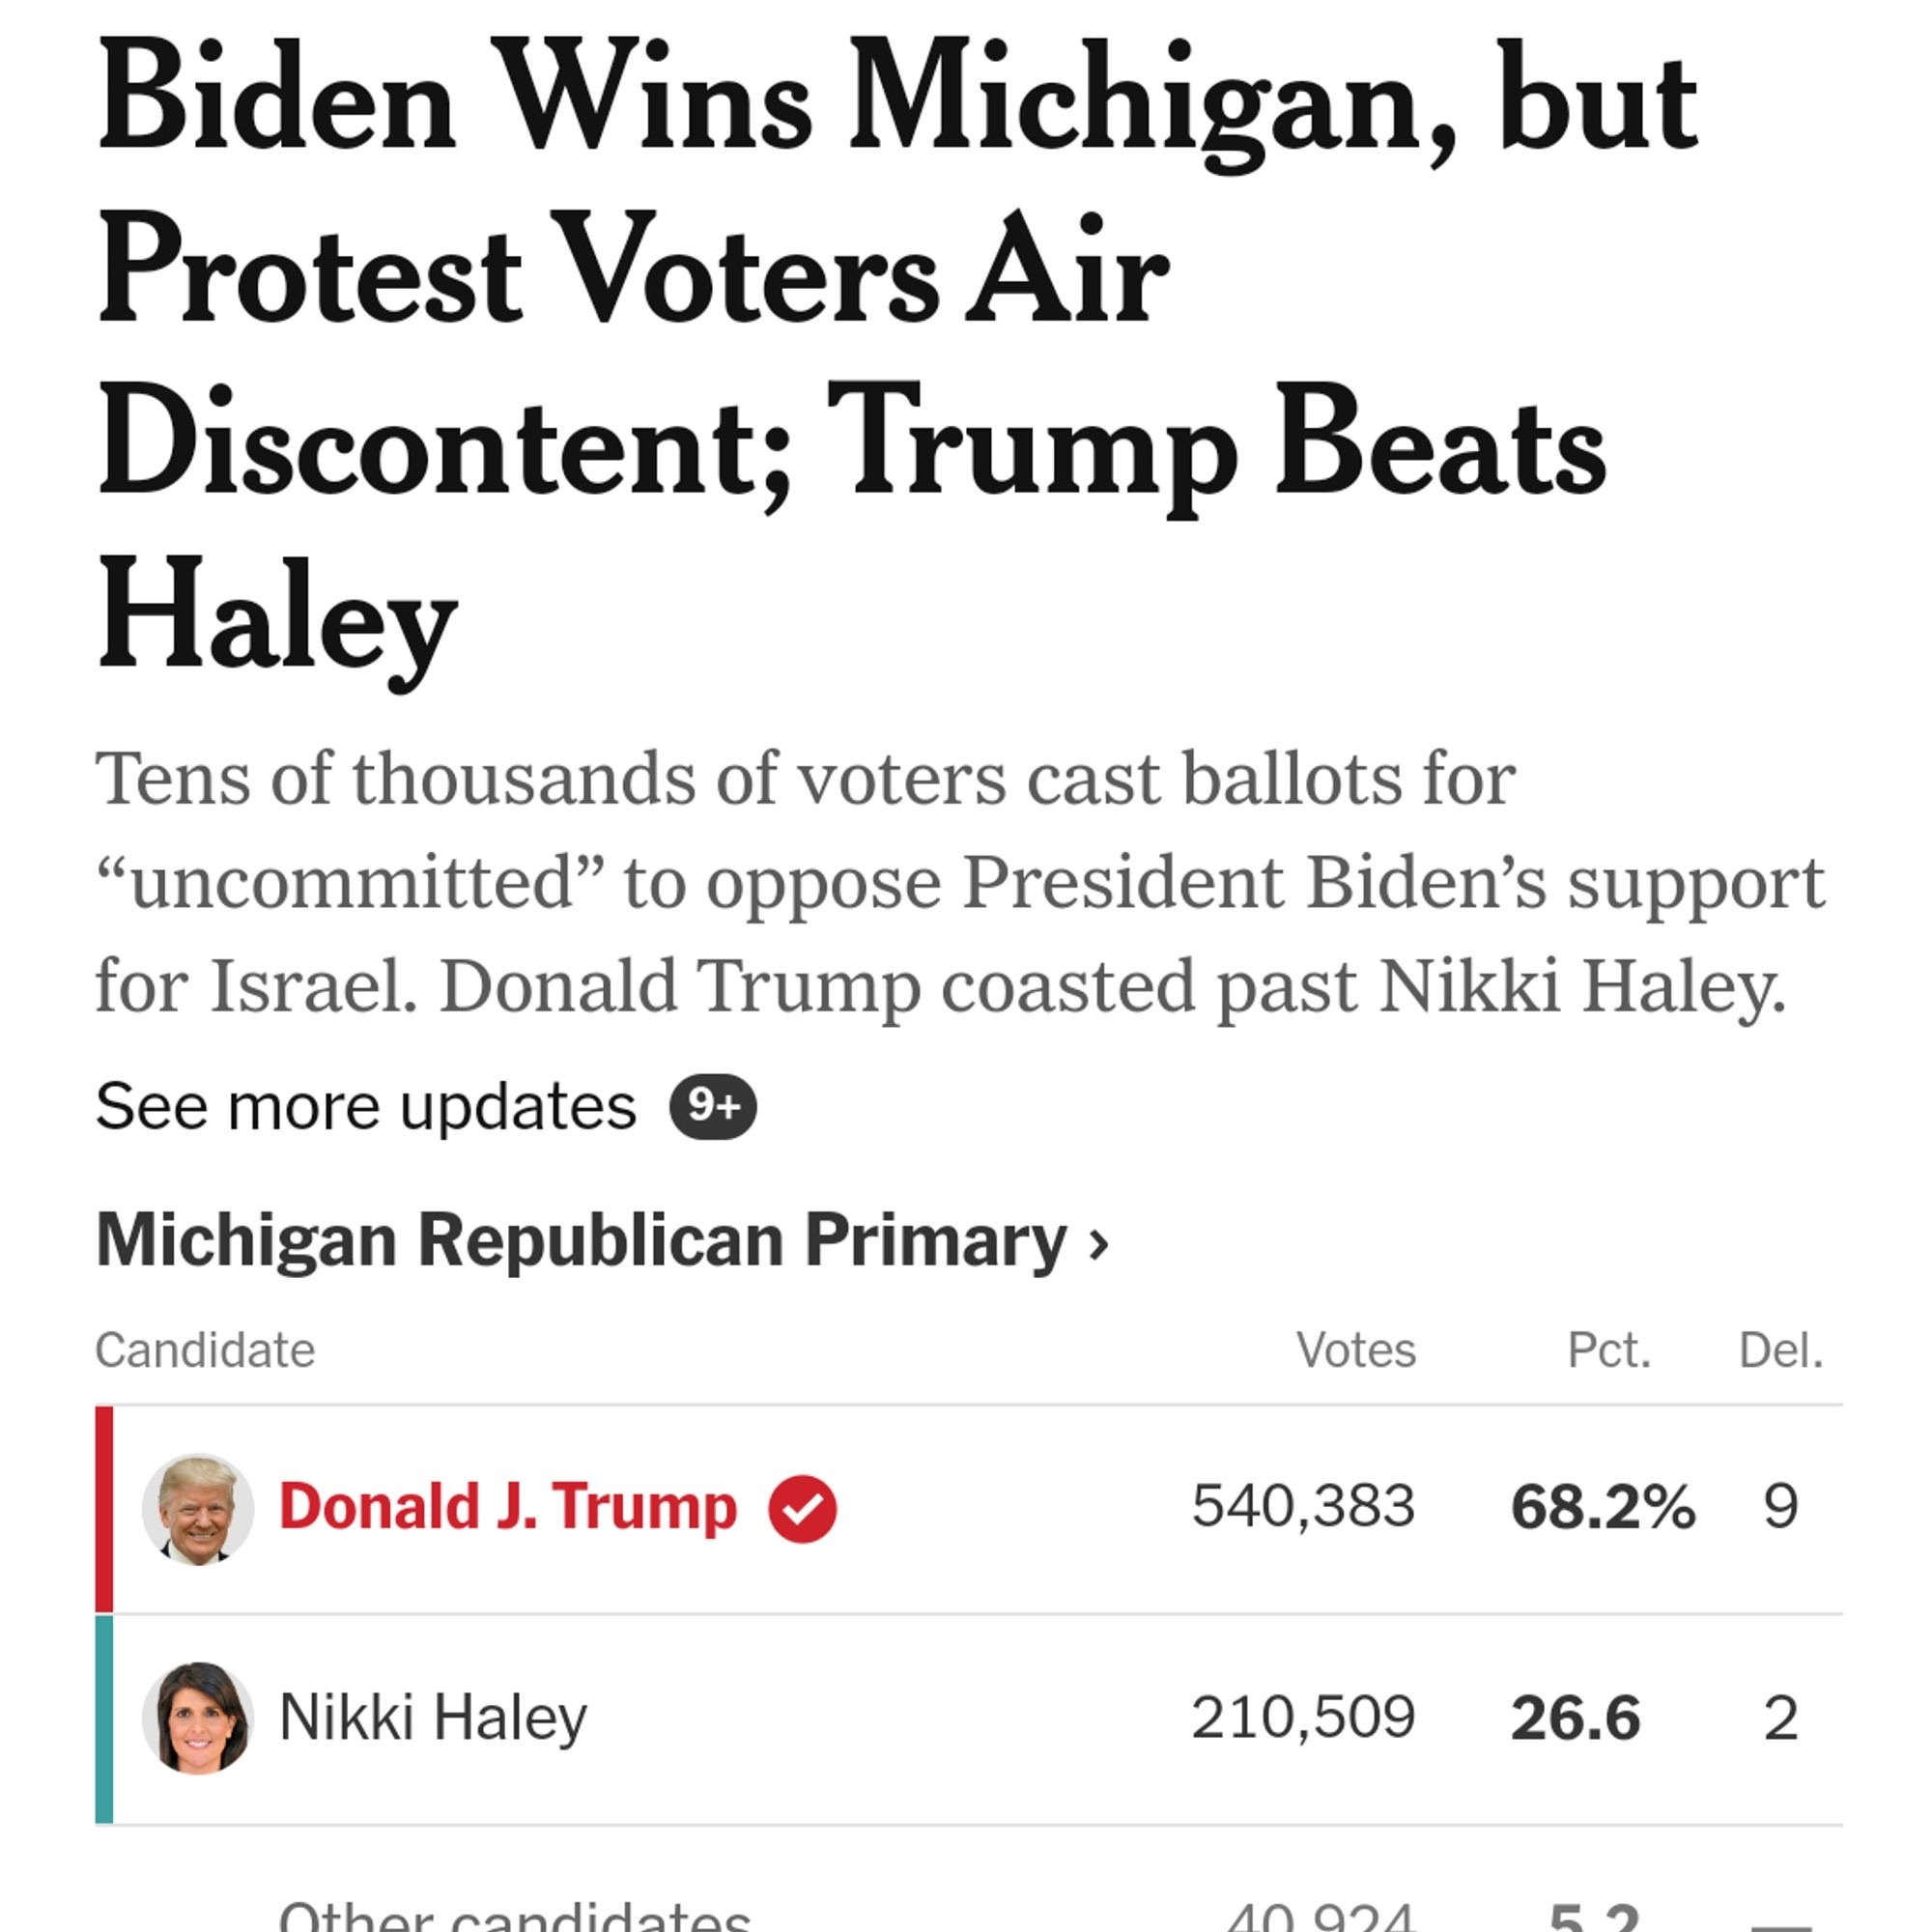 a title from the yew york times framing trumps win as coasting but biden as protest votes hurting biden 